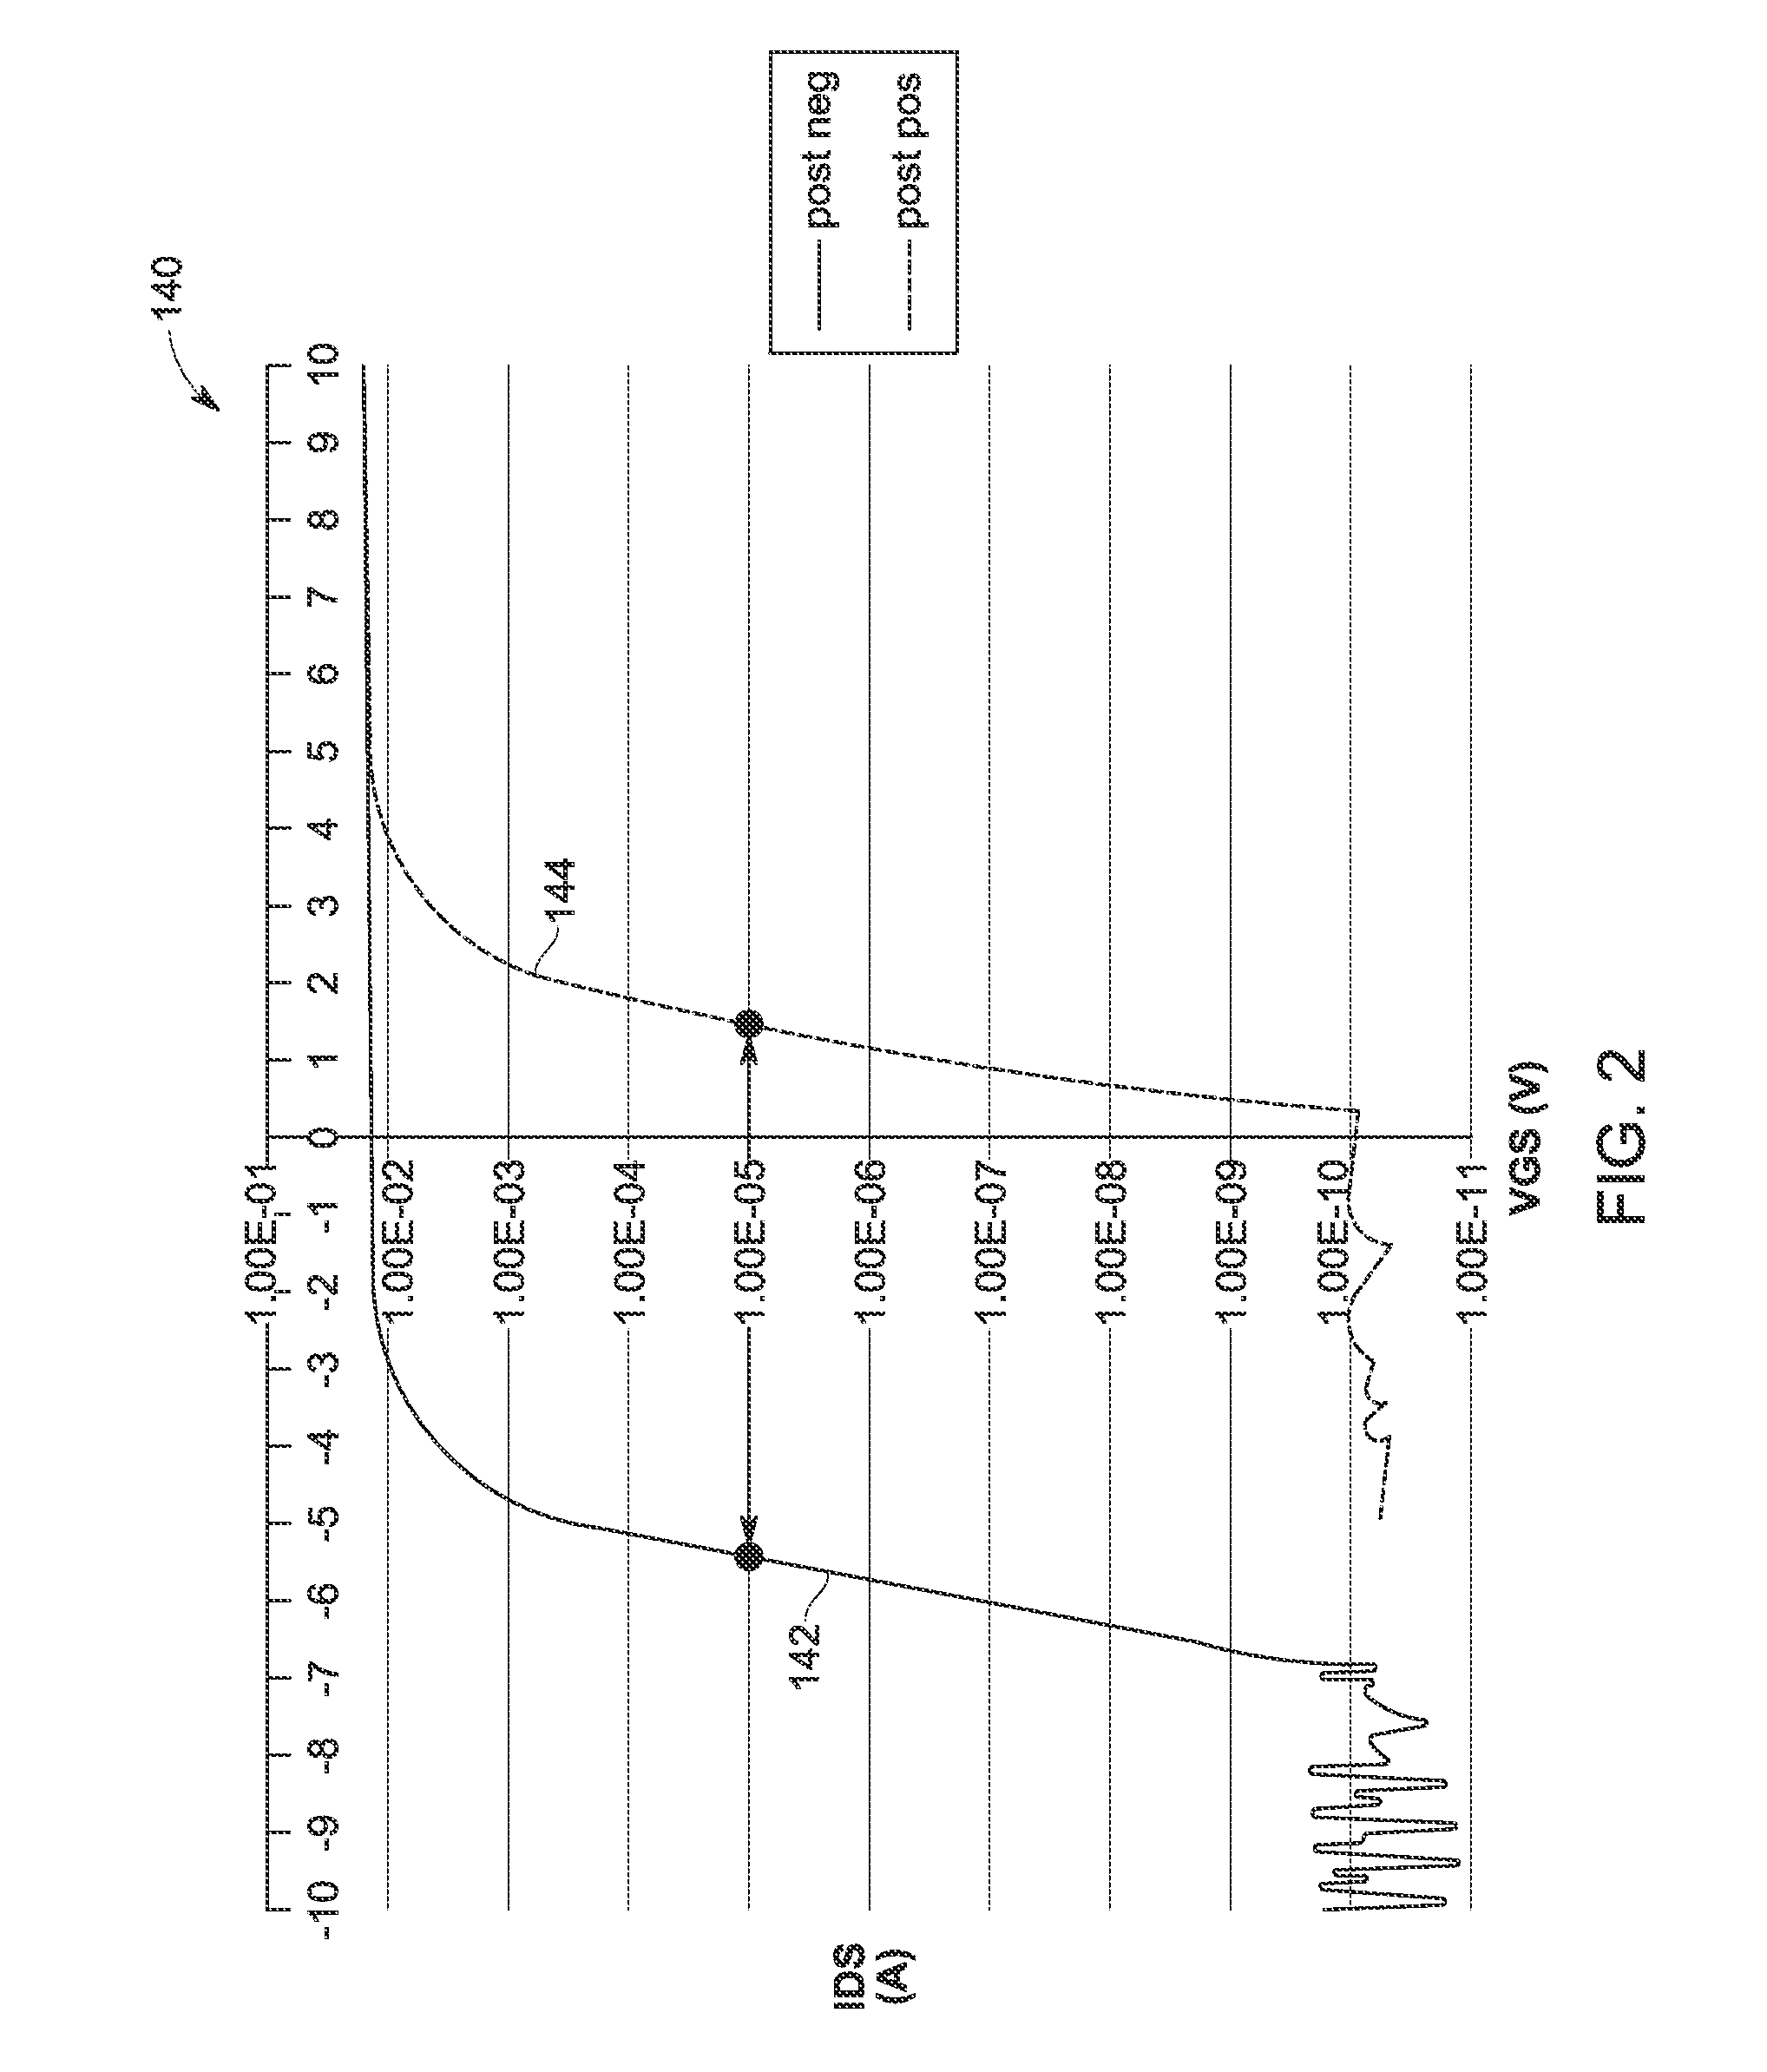 Semiconductor device and method for reduced bias temperature instability (BTI) in silicon carbide devices